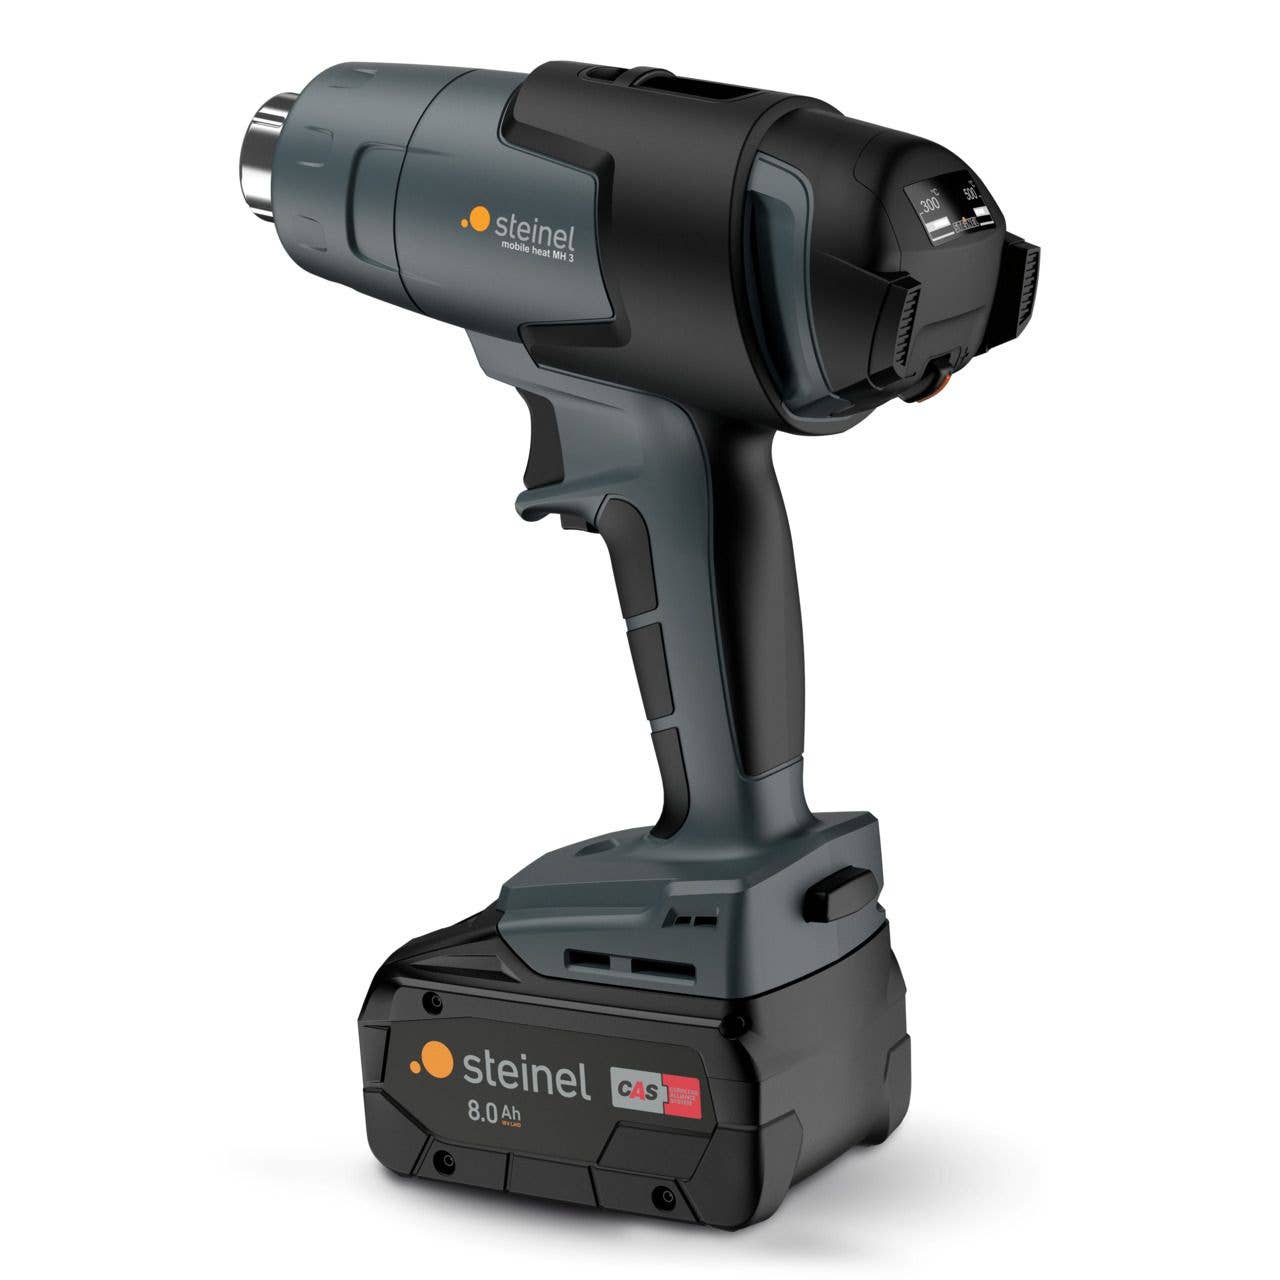 Mobile Heat 3 Cordless Heat Gun with 8.0 Ah Battery and Case by